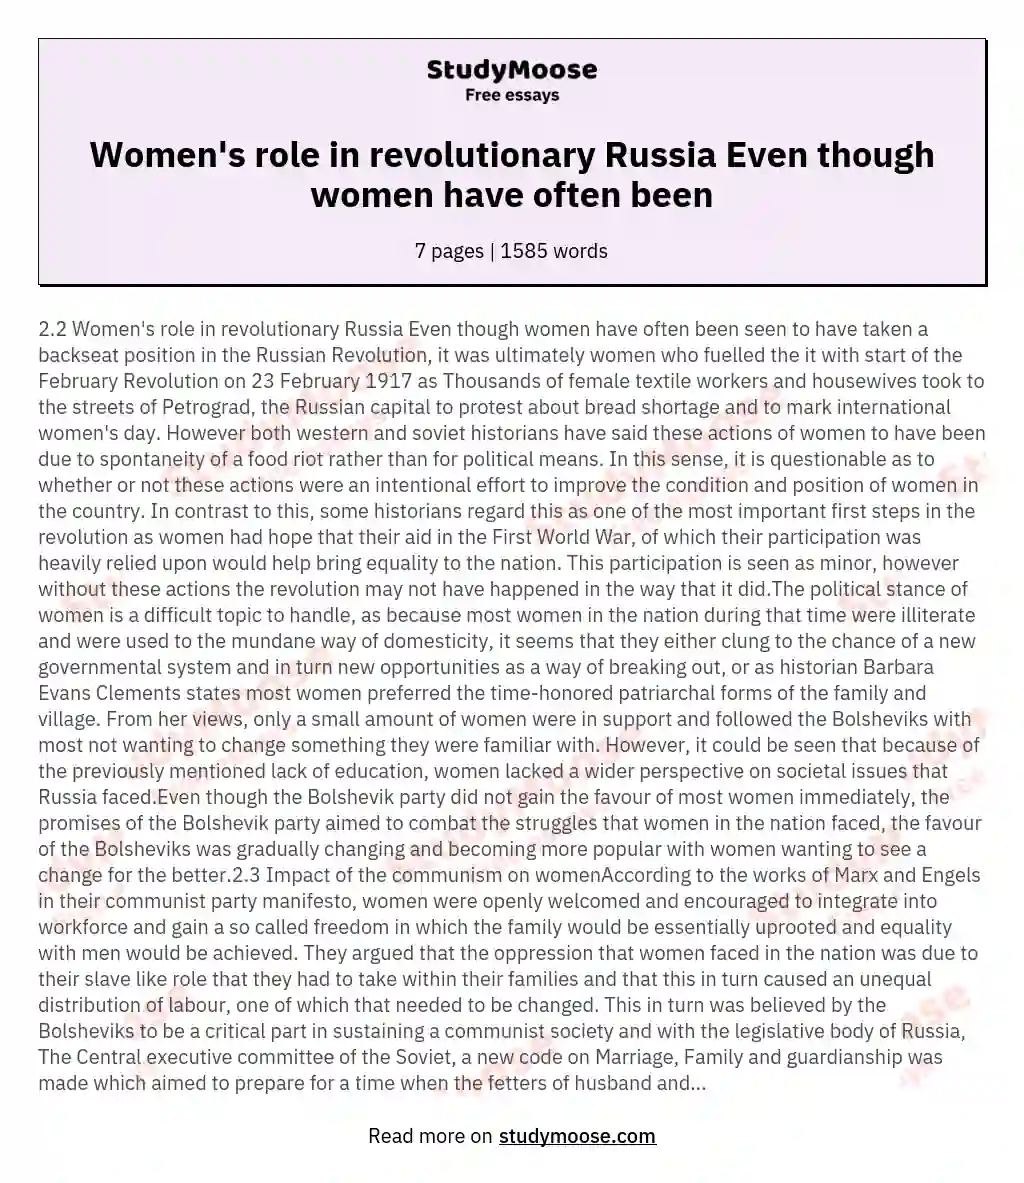 Women's role in revolutionary Russia Even though women have often been